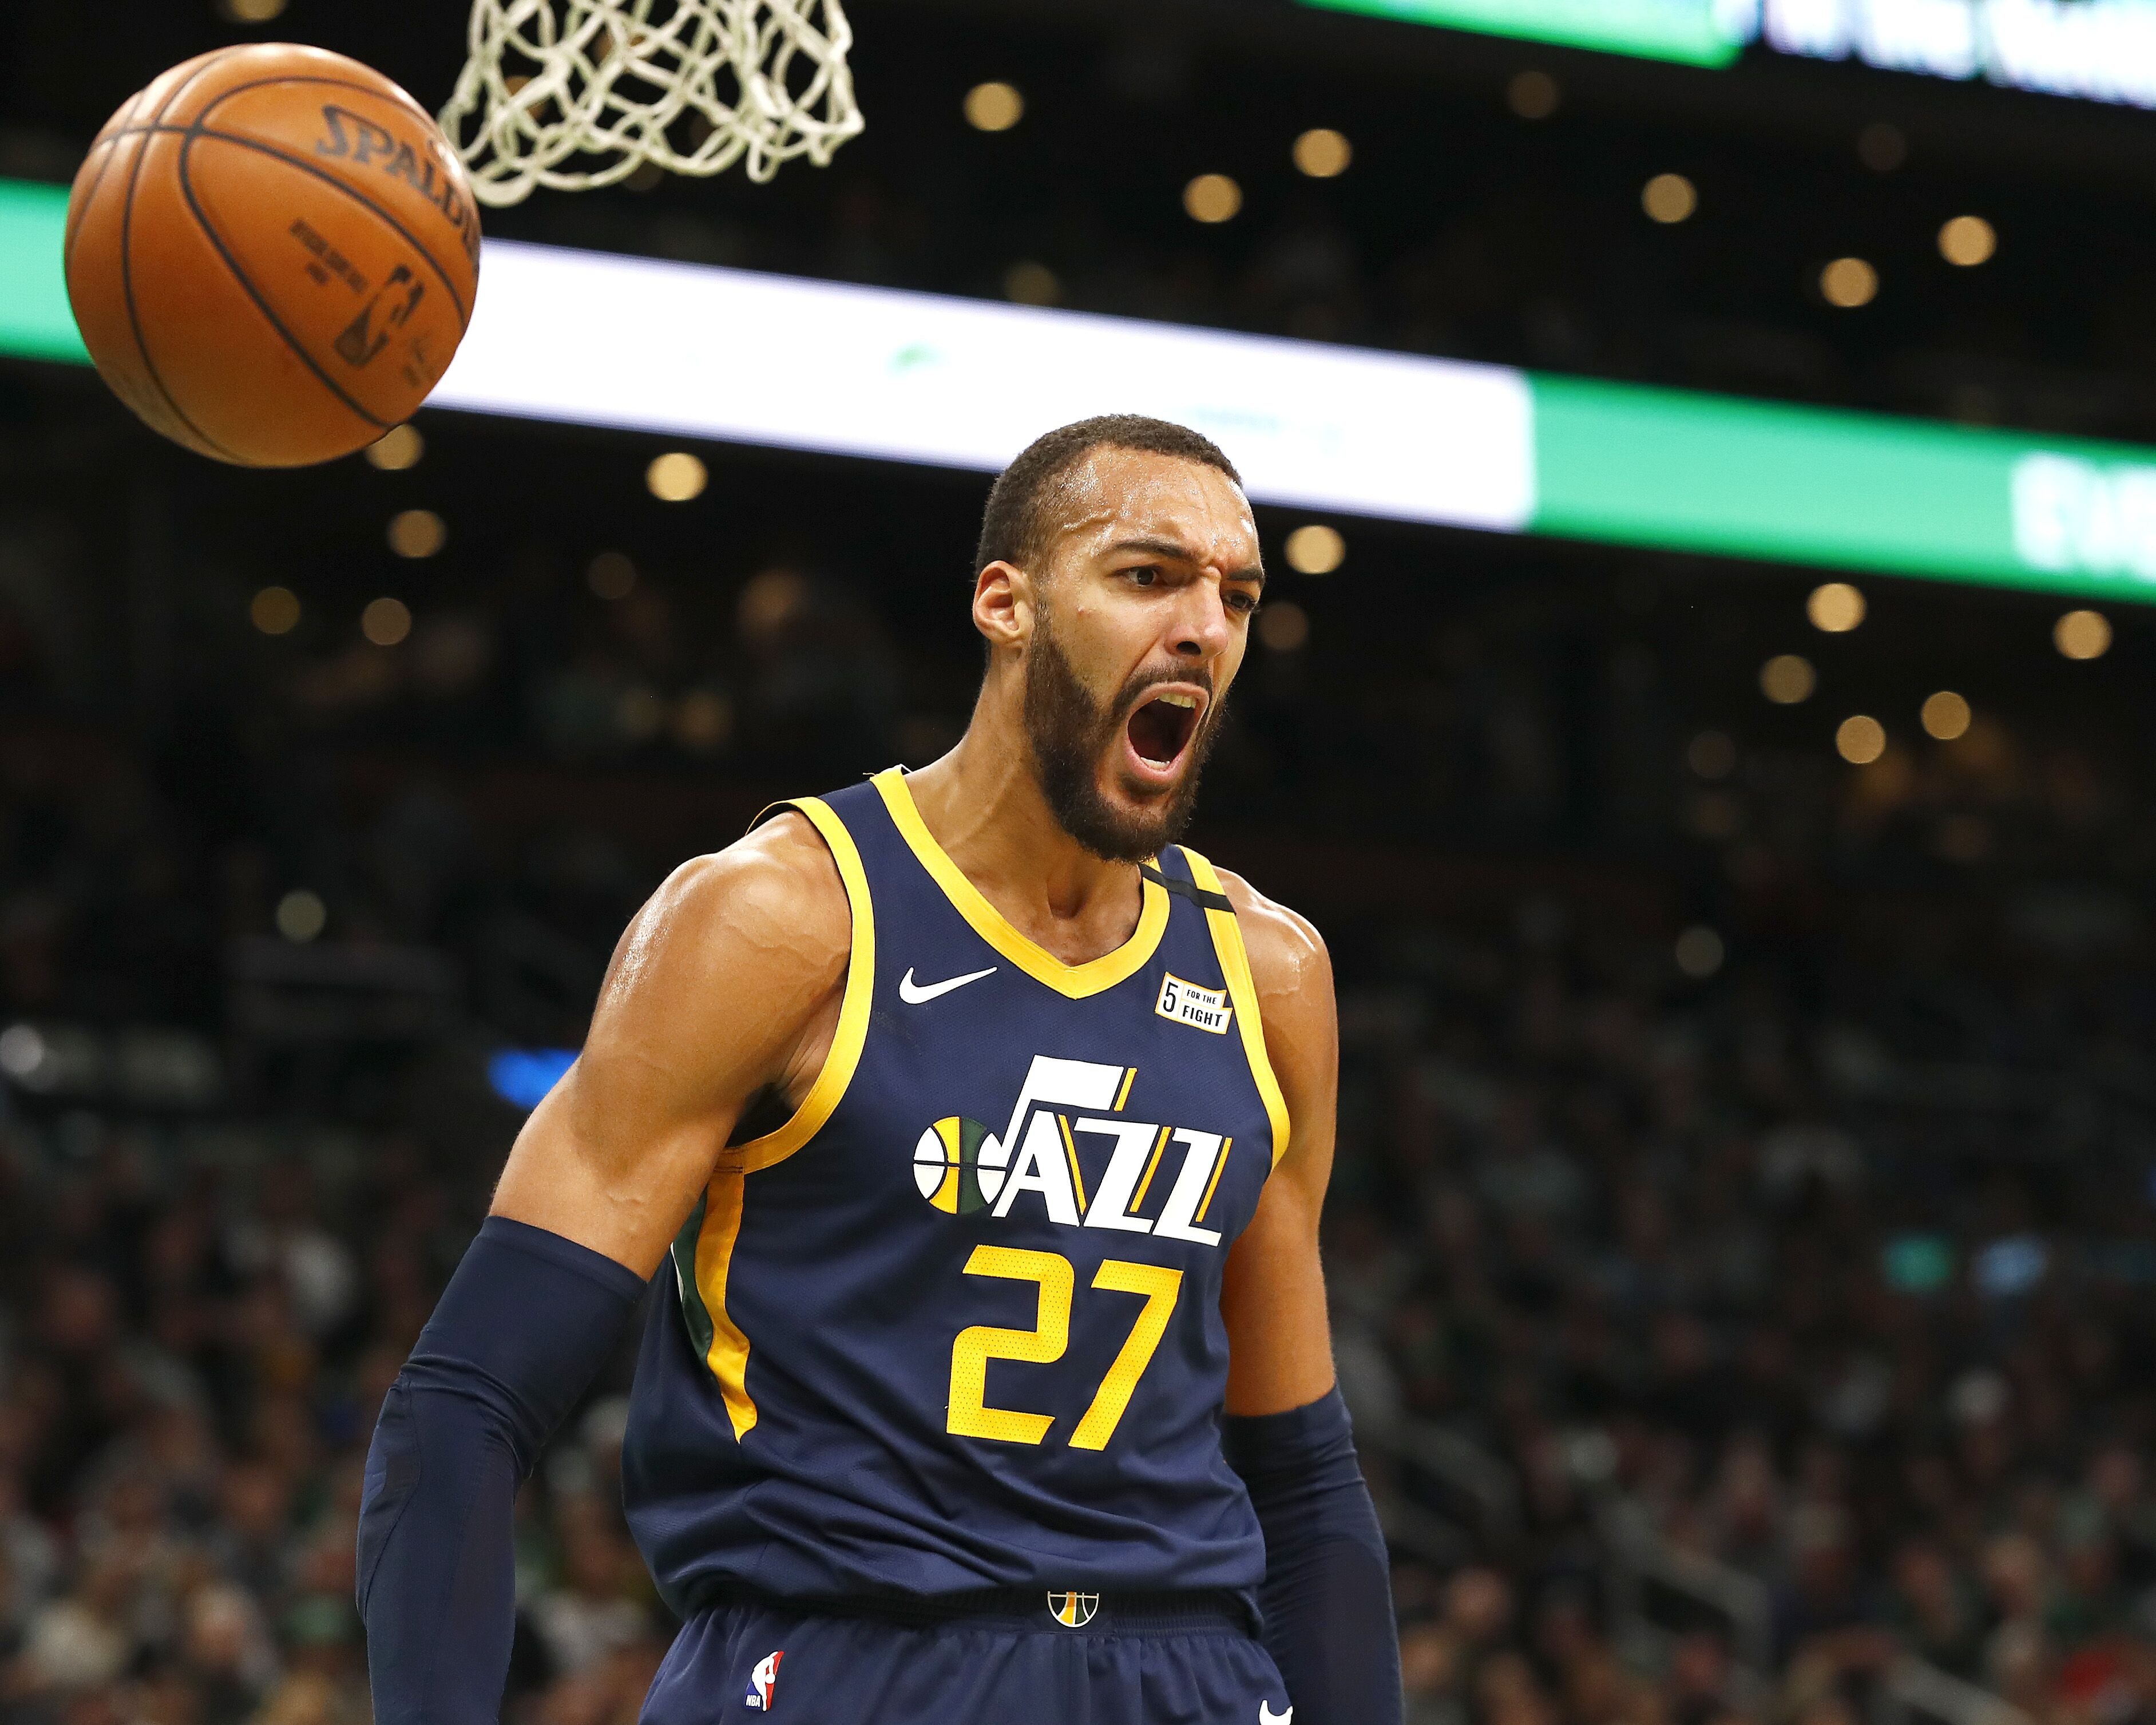 Rudy Gobert reacts after dunking during the third quarter of the game against the Boston Celtics at TD Garden on March 06, 2020 in Boston, Massachusetts. | Source: Getty Images